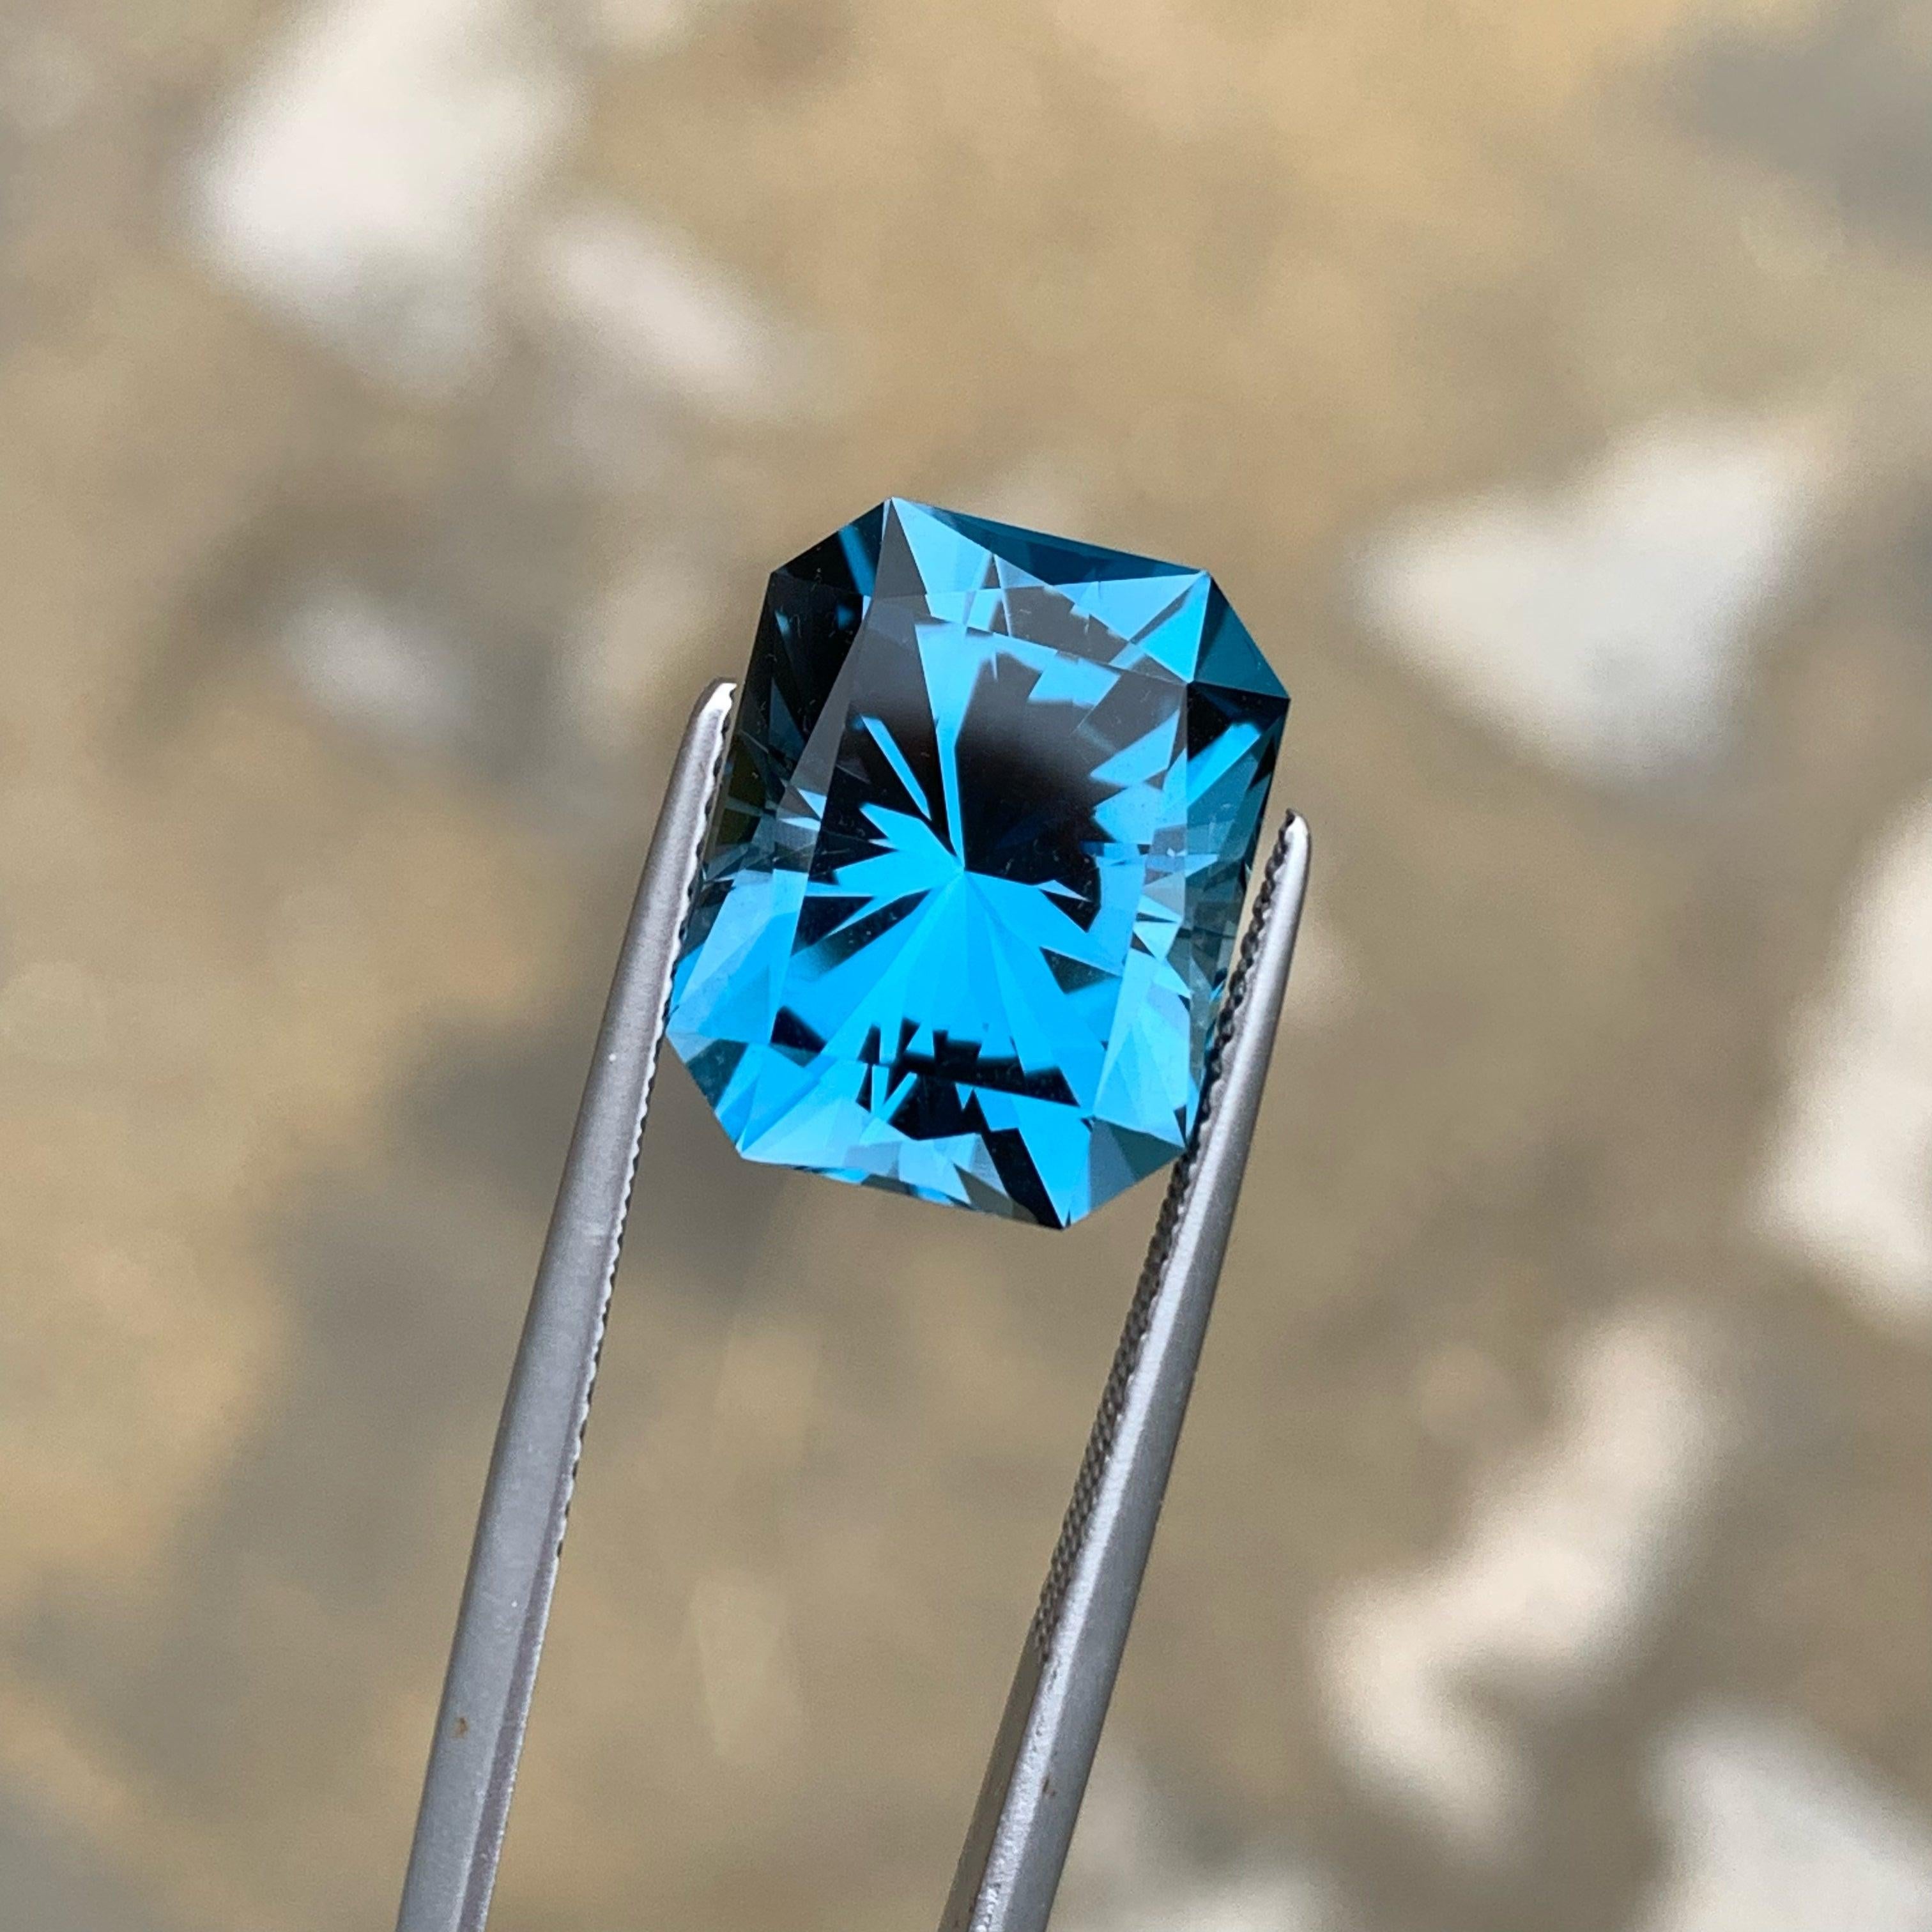 Brilliant London Blue Topaz Gemstone, available For Sale At Wholesale Price Natural High Quality 11.45 Carats Octagon Shape Loupe Clean Clarity Loose Topaz Gemstone From Africa. 

Product Information:
GEMSTONE NAME: Brilliant London Blue Topaz